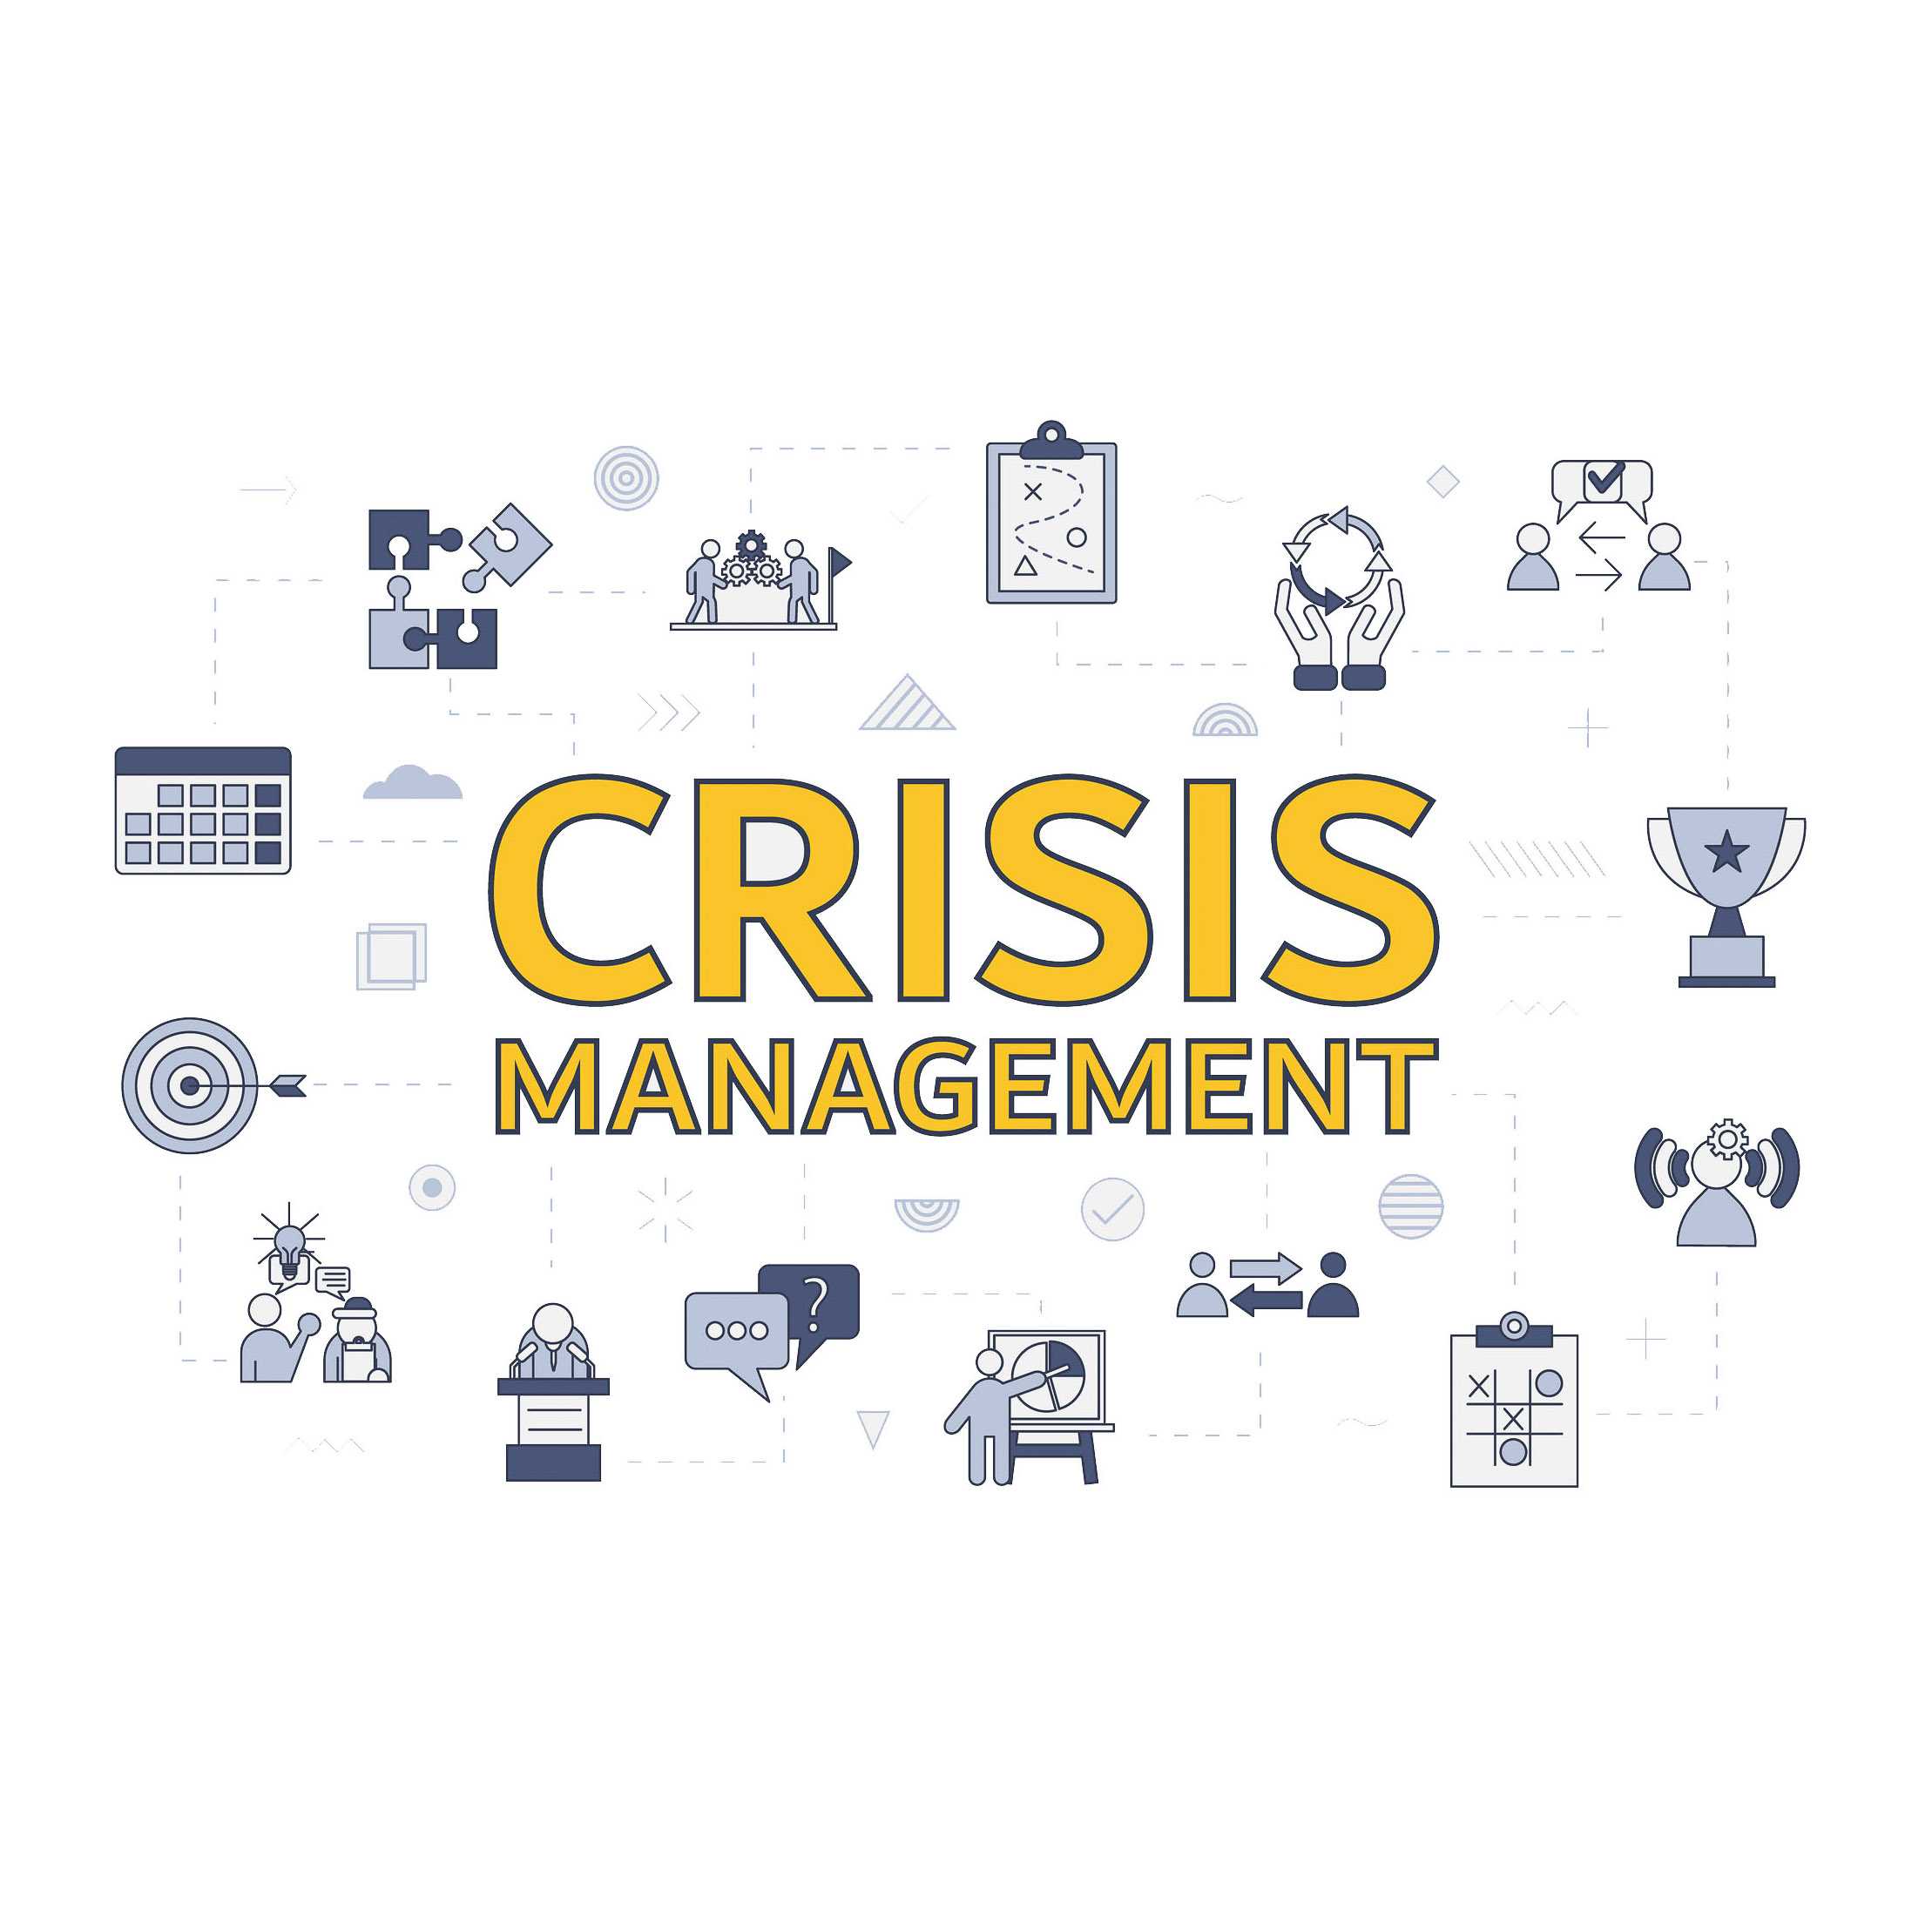 Crisis and Issues Management